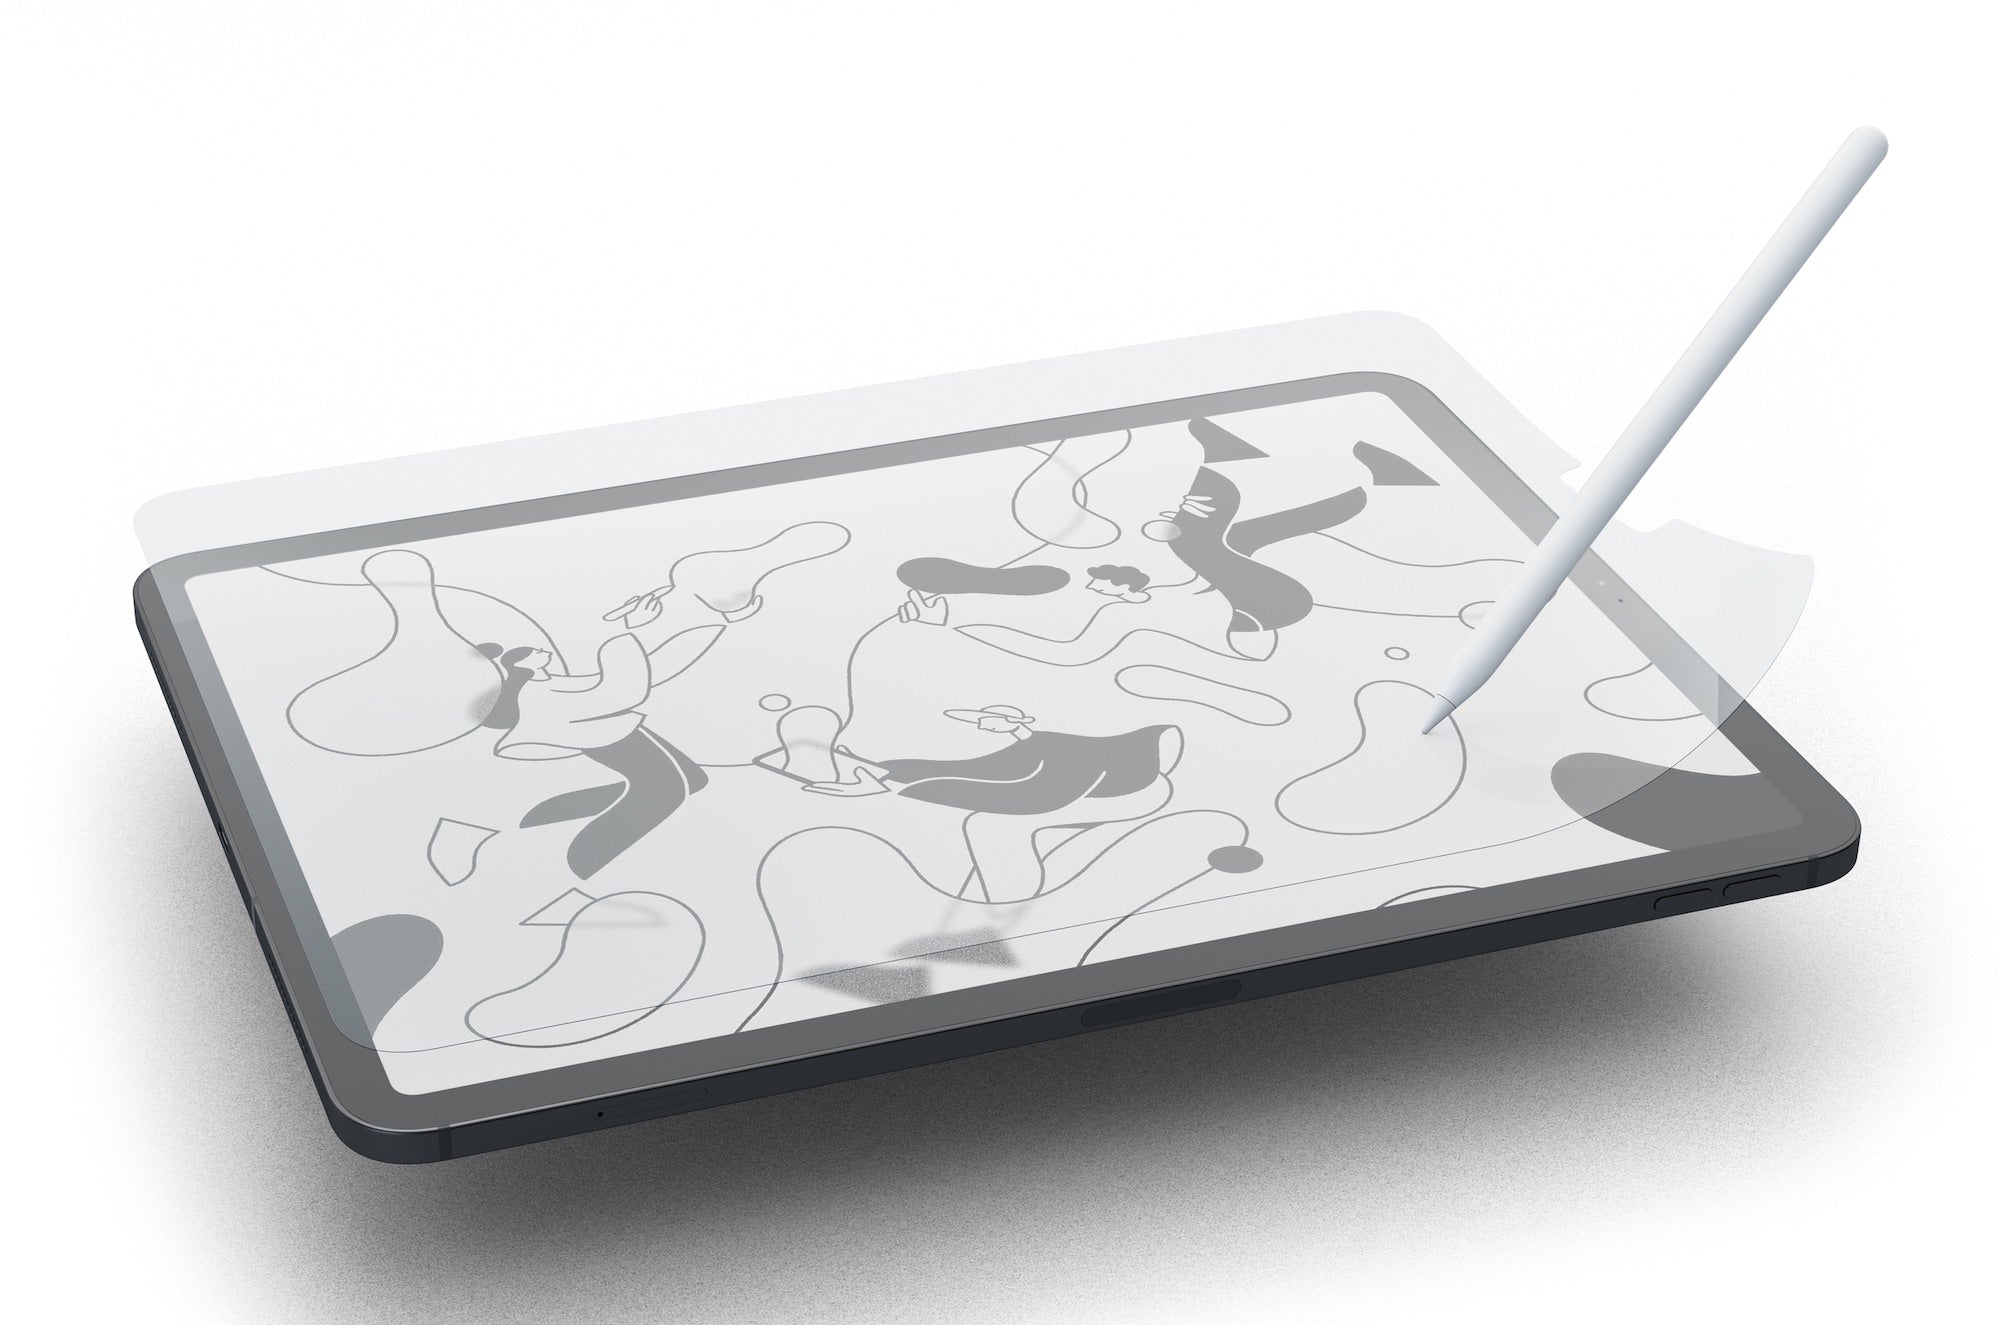 The Paperlike 2 with Nanodots: a Dream Come True for iPad & Apple Pencil Users